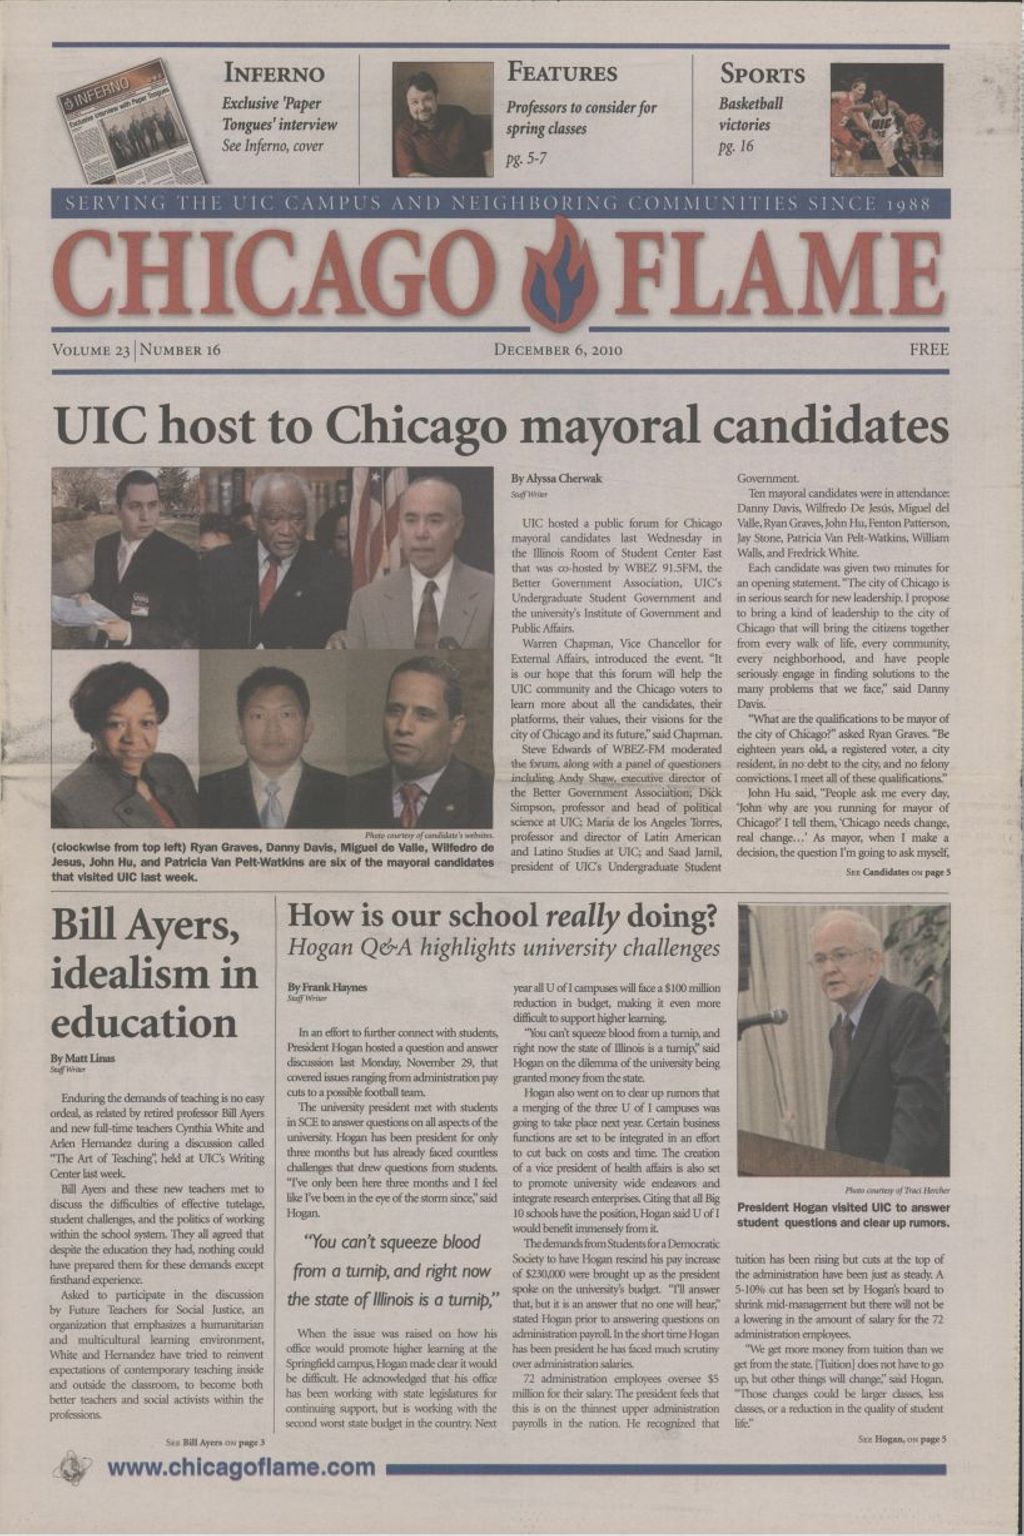 Miniature of Chicago Flame (December 6, 2010)